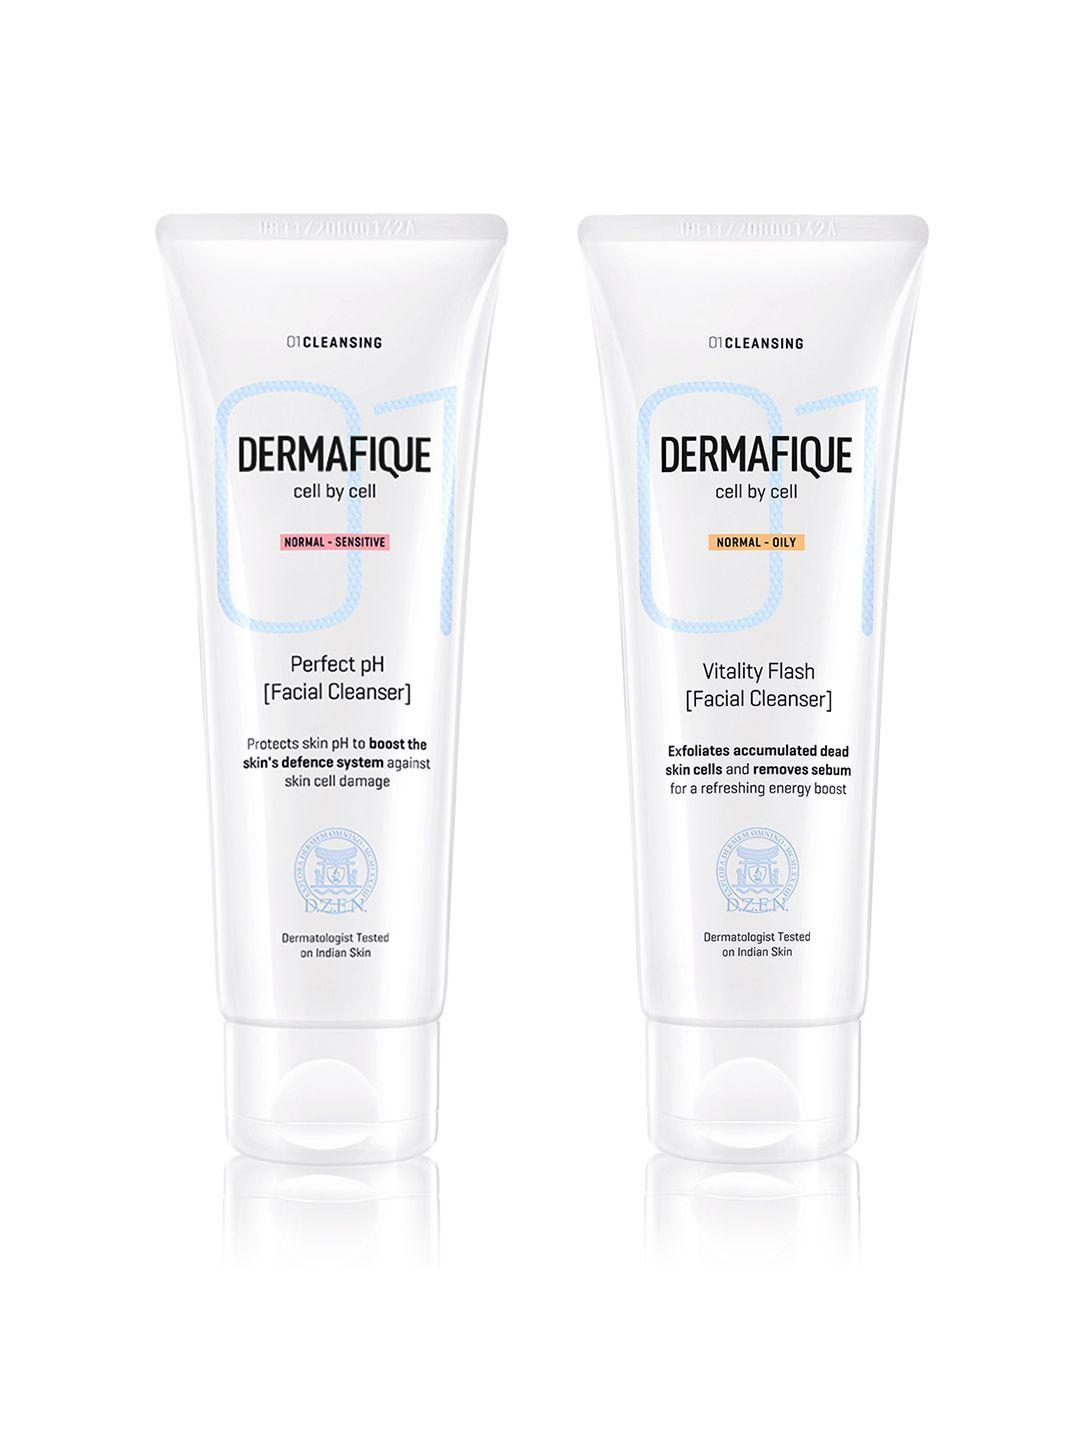 dermafique set of 2 facial cleanser- perfect ph & vitality flash